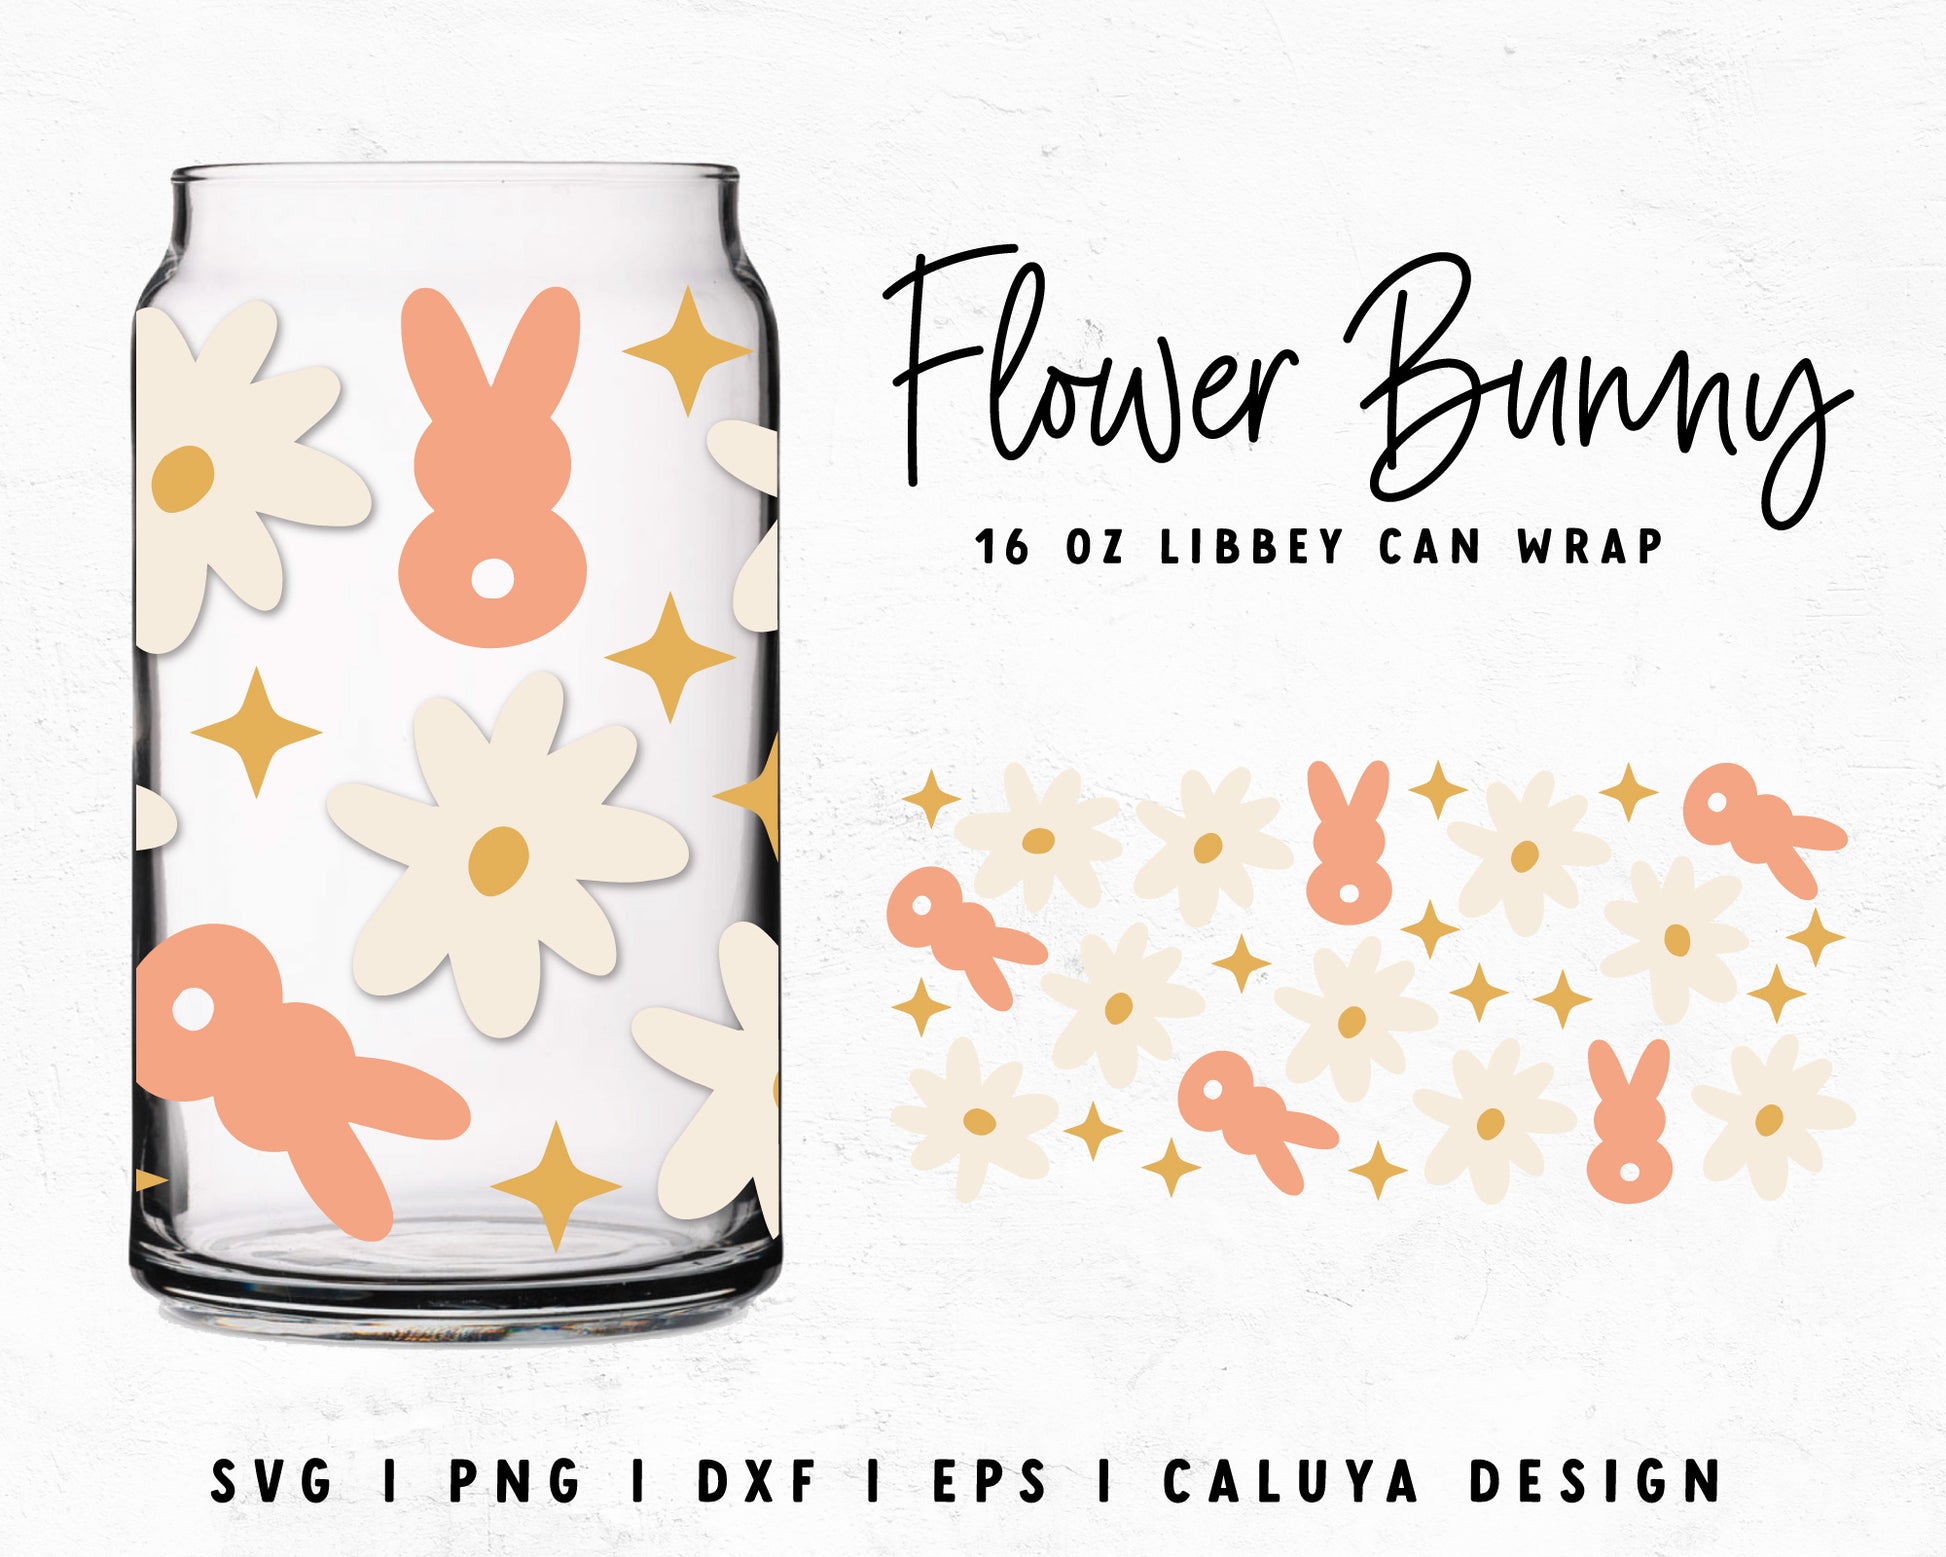 16oz Libbey Can Flower & Easter Bunny Cup Wrap Cut File for Cricut, Cameo Silhouette | Free SVG Cut File